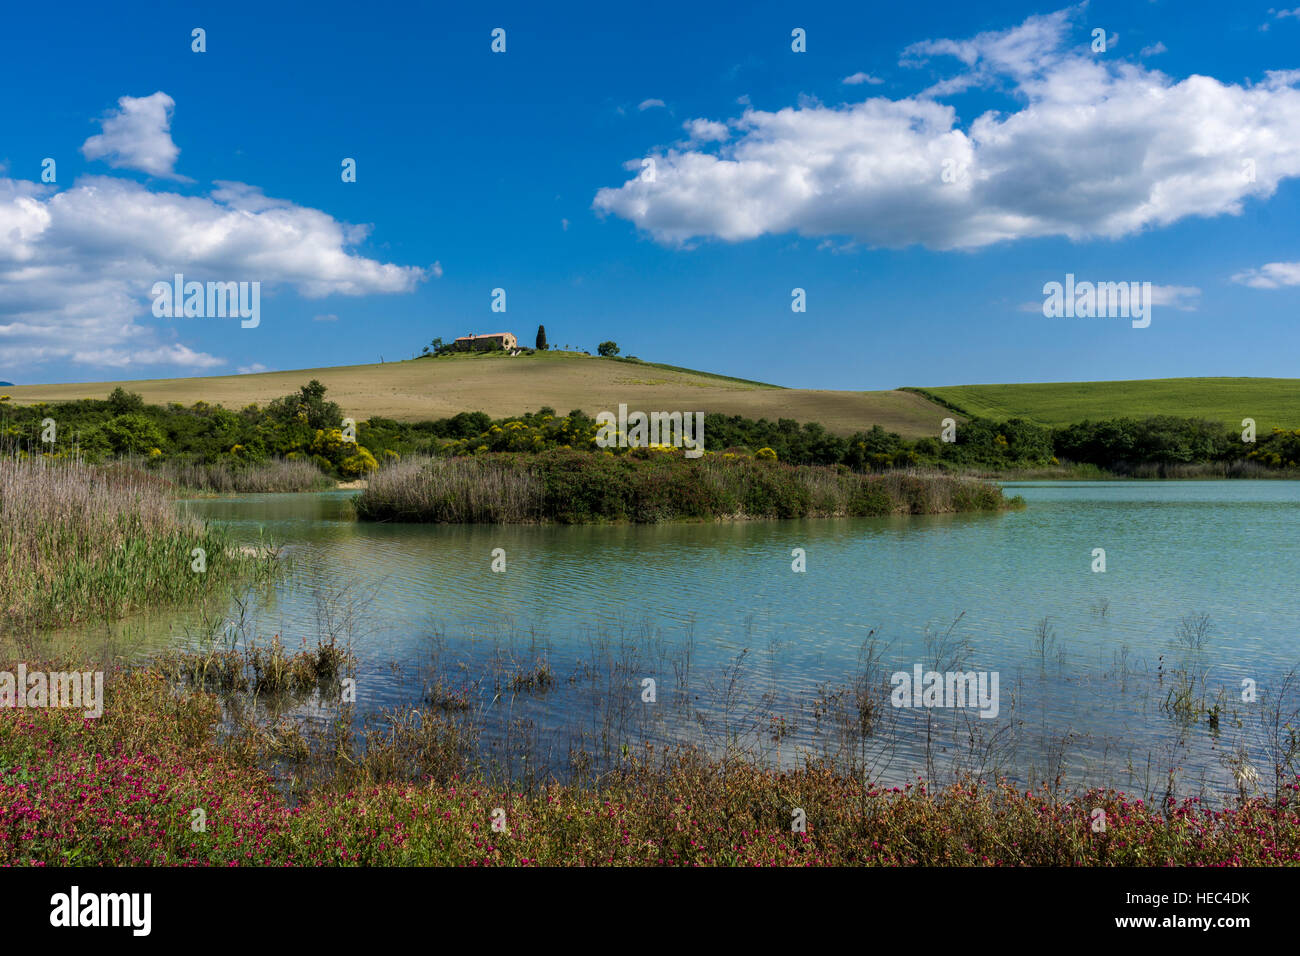 Typical green Tuscany landscape in Val d’Orcia with a farm on a hill, a lake and blue cloudy sky Stock Photo